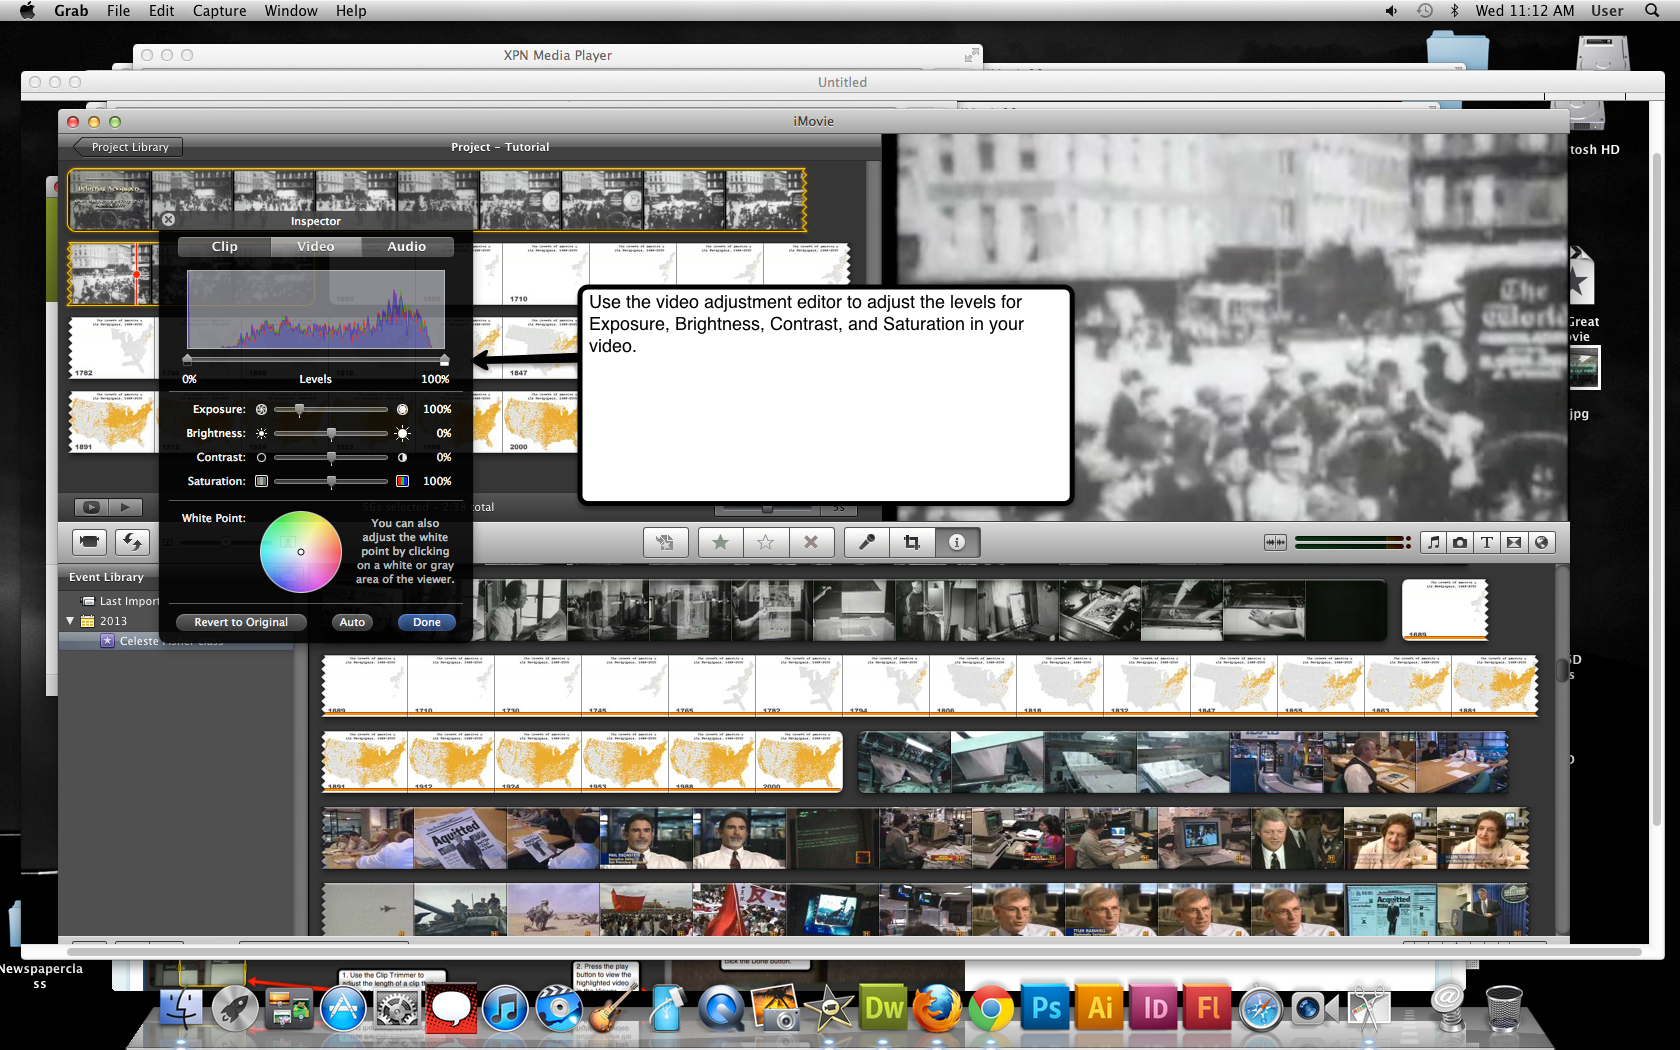 Visual guide on how to edit video in iMovie '11